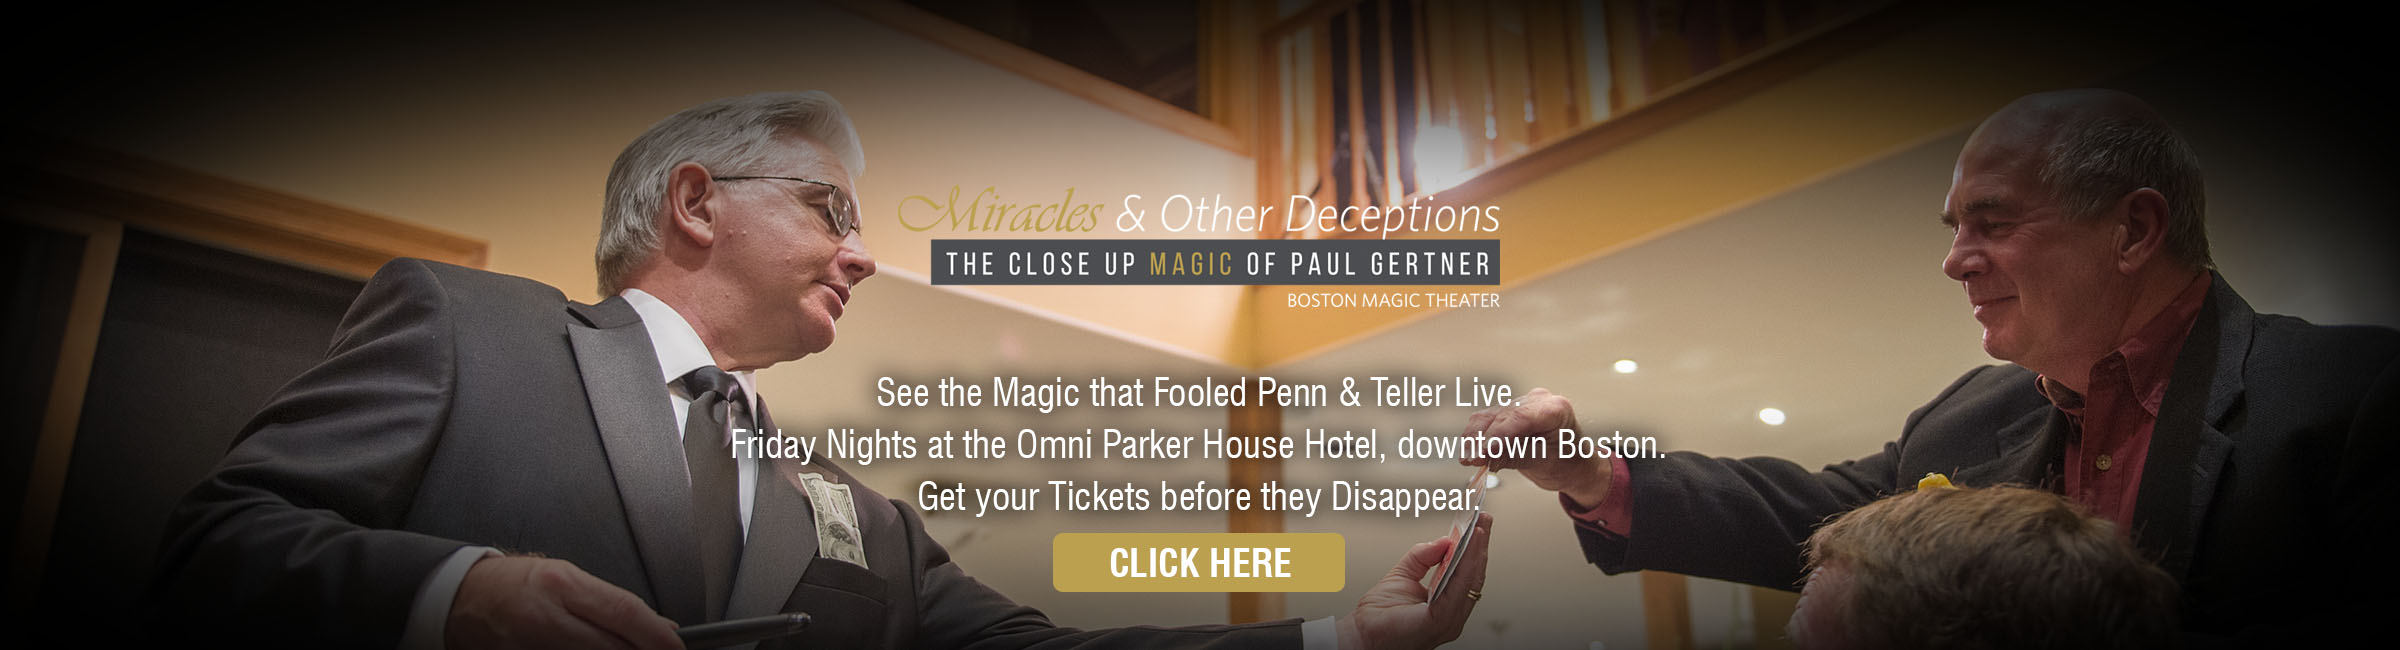 Miracles and Other Deceptions | The Close Up Magic of Paul Gertner